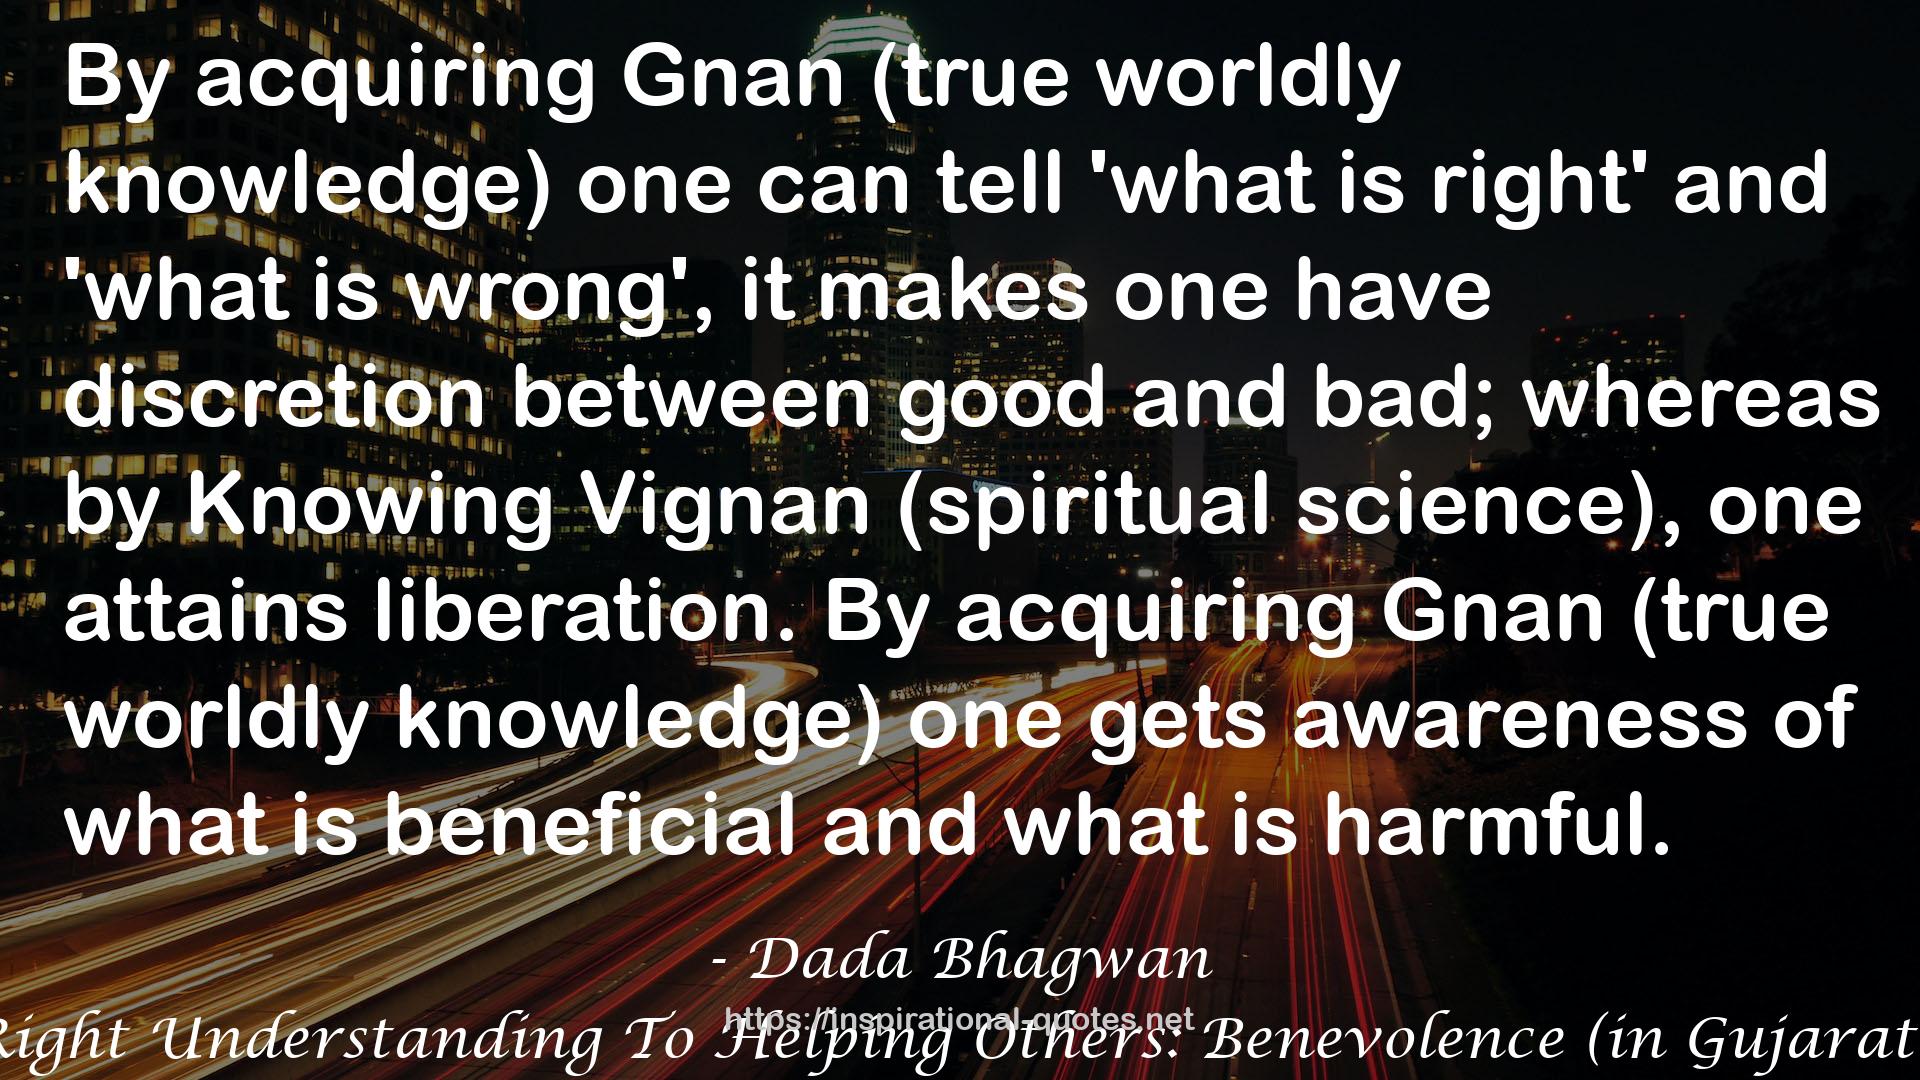 Right Understanding To Helping Others: Benevolence (in Gujarati) QUOTES